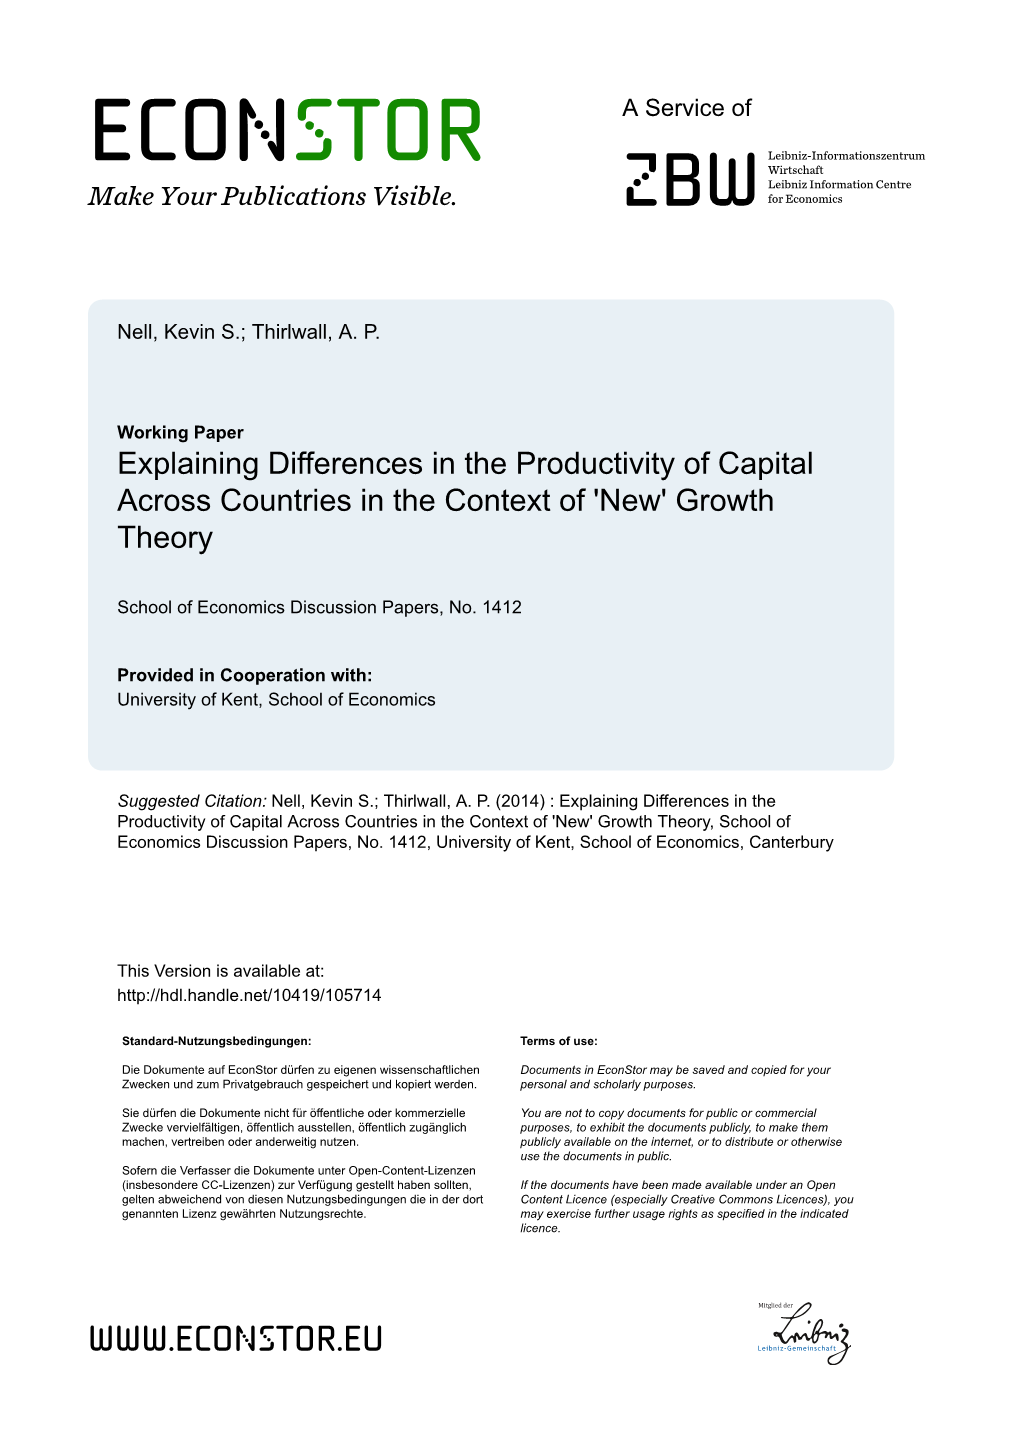 Explaining Differences in the Productivity of Capital Across Countries in the Context of 'New' Growth Theory